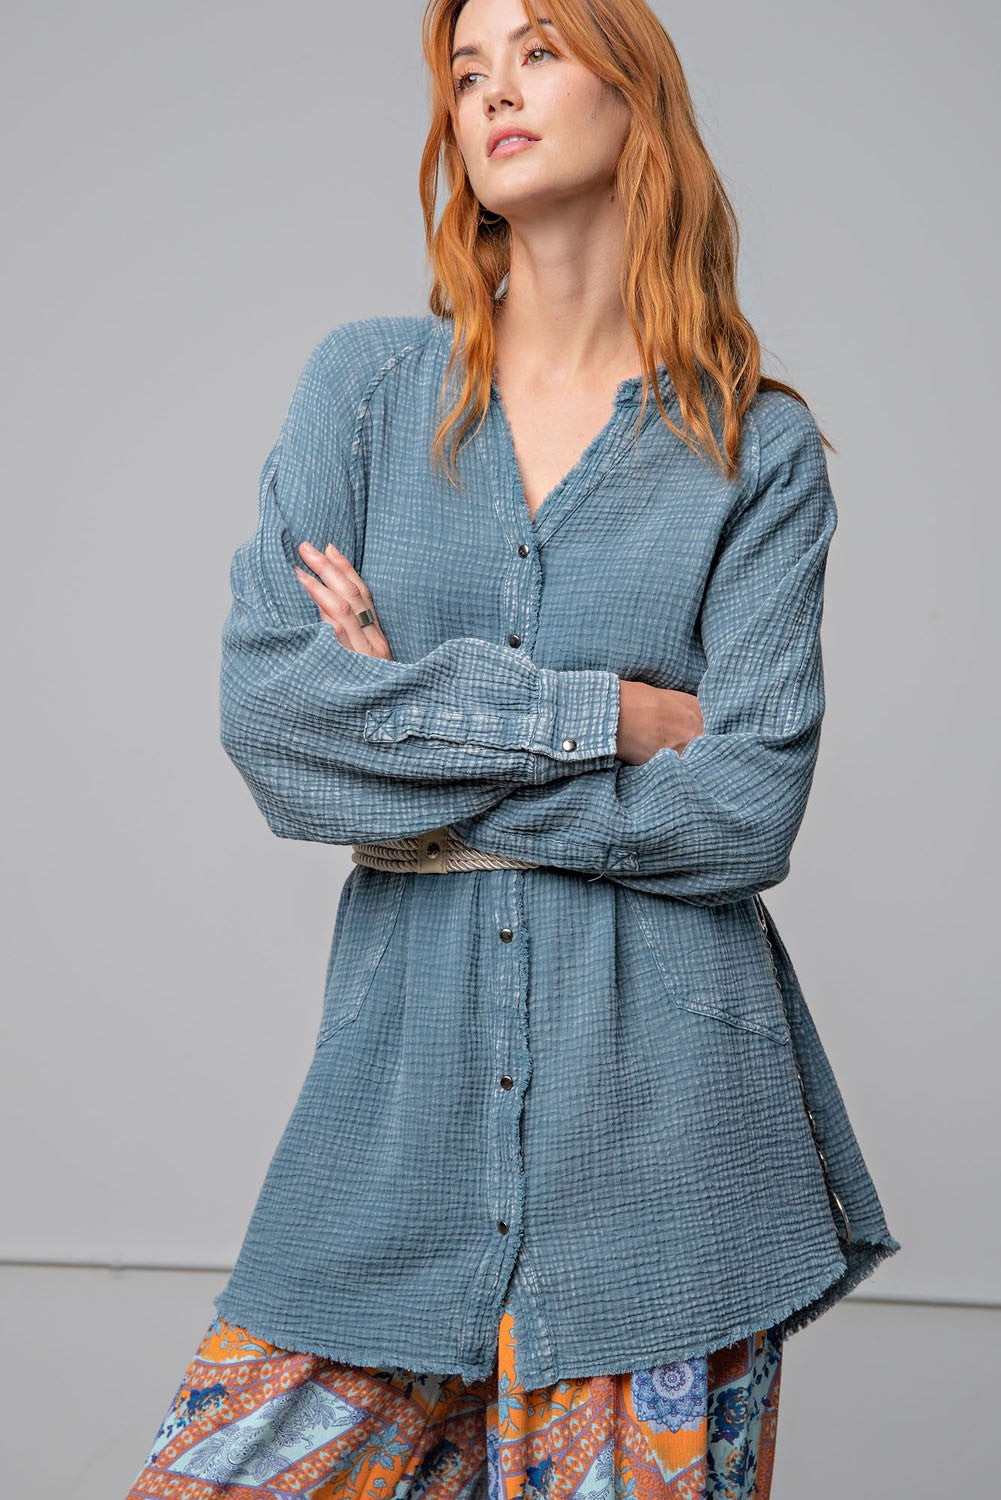 Easel Washed Cotton Gauze Tunic Shirt in Faded Teal Top Easel   